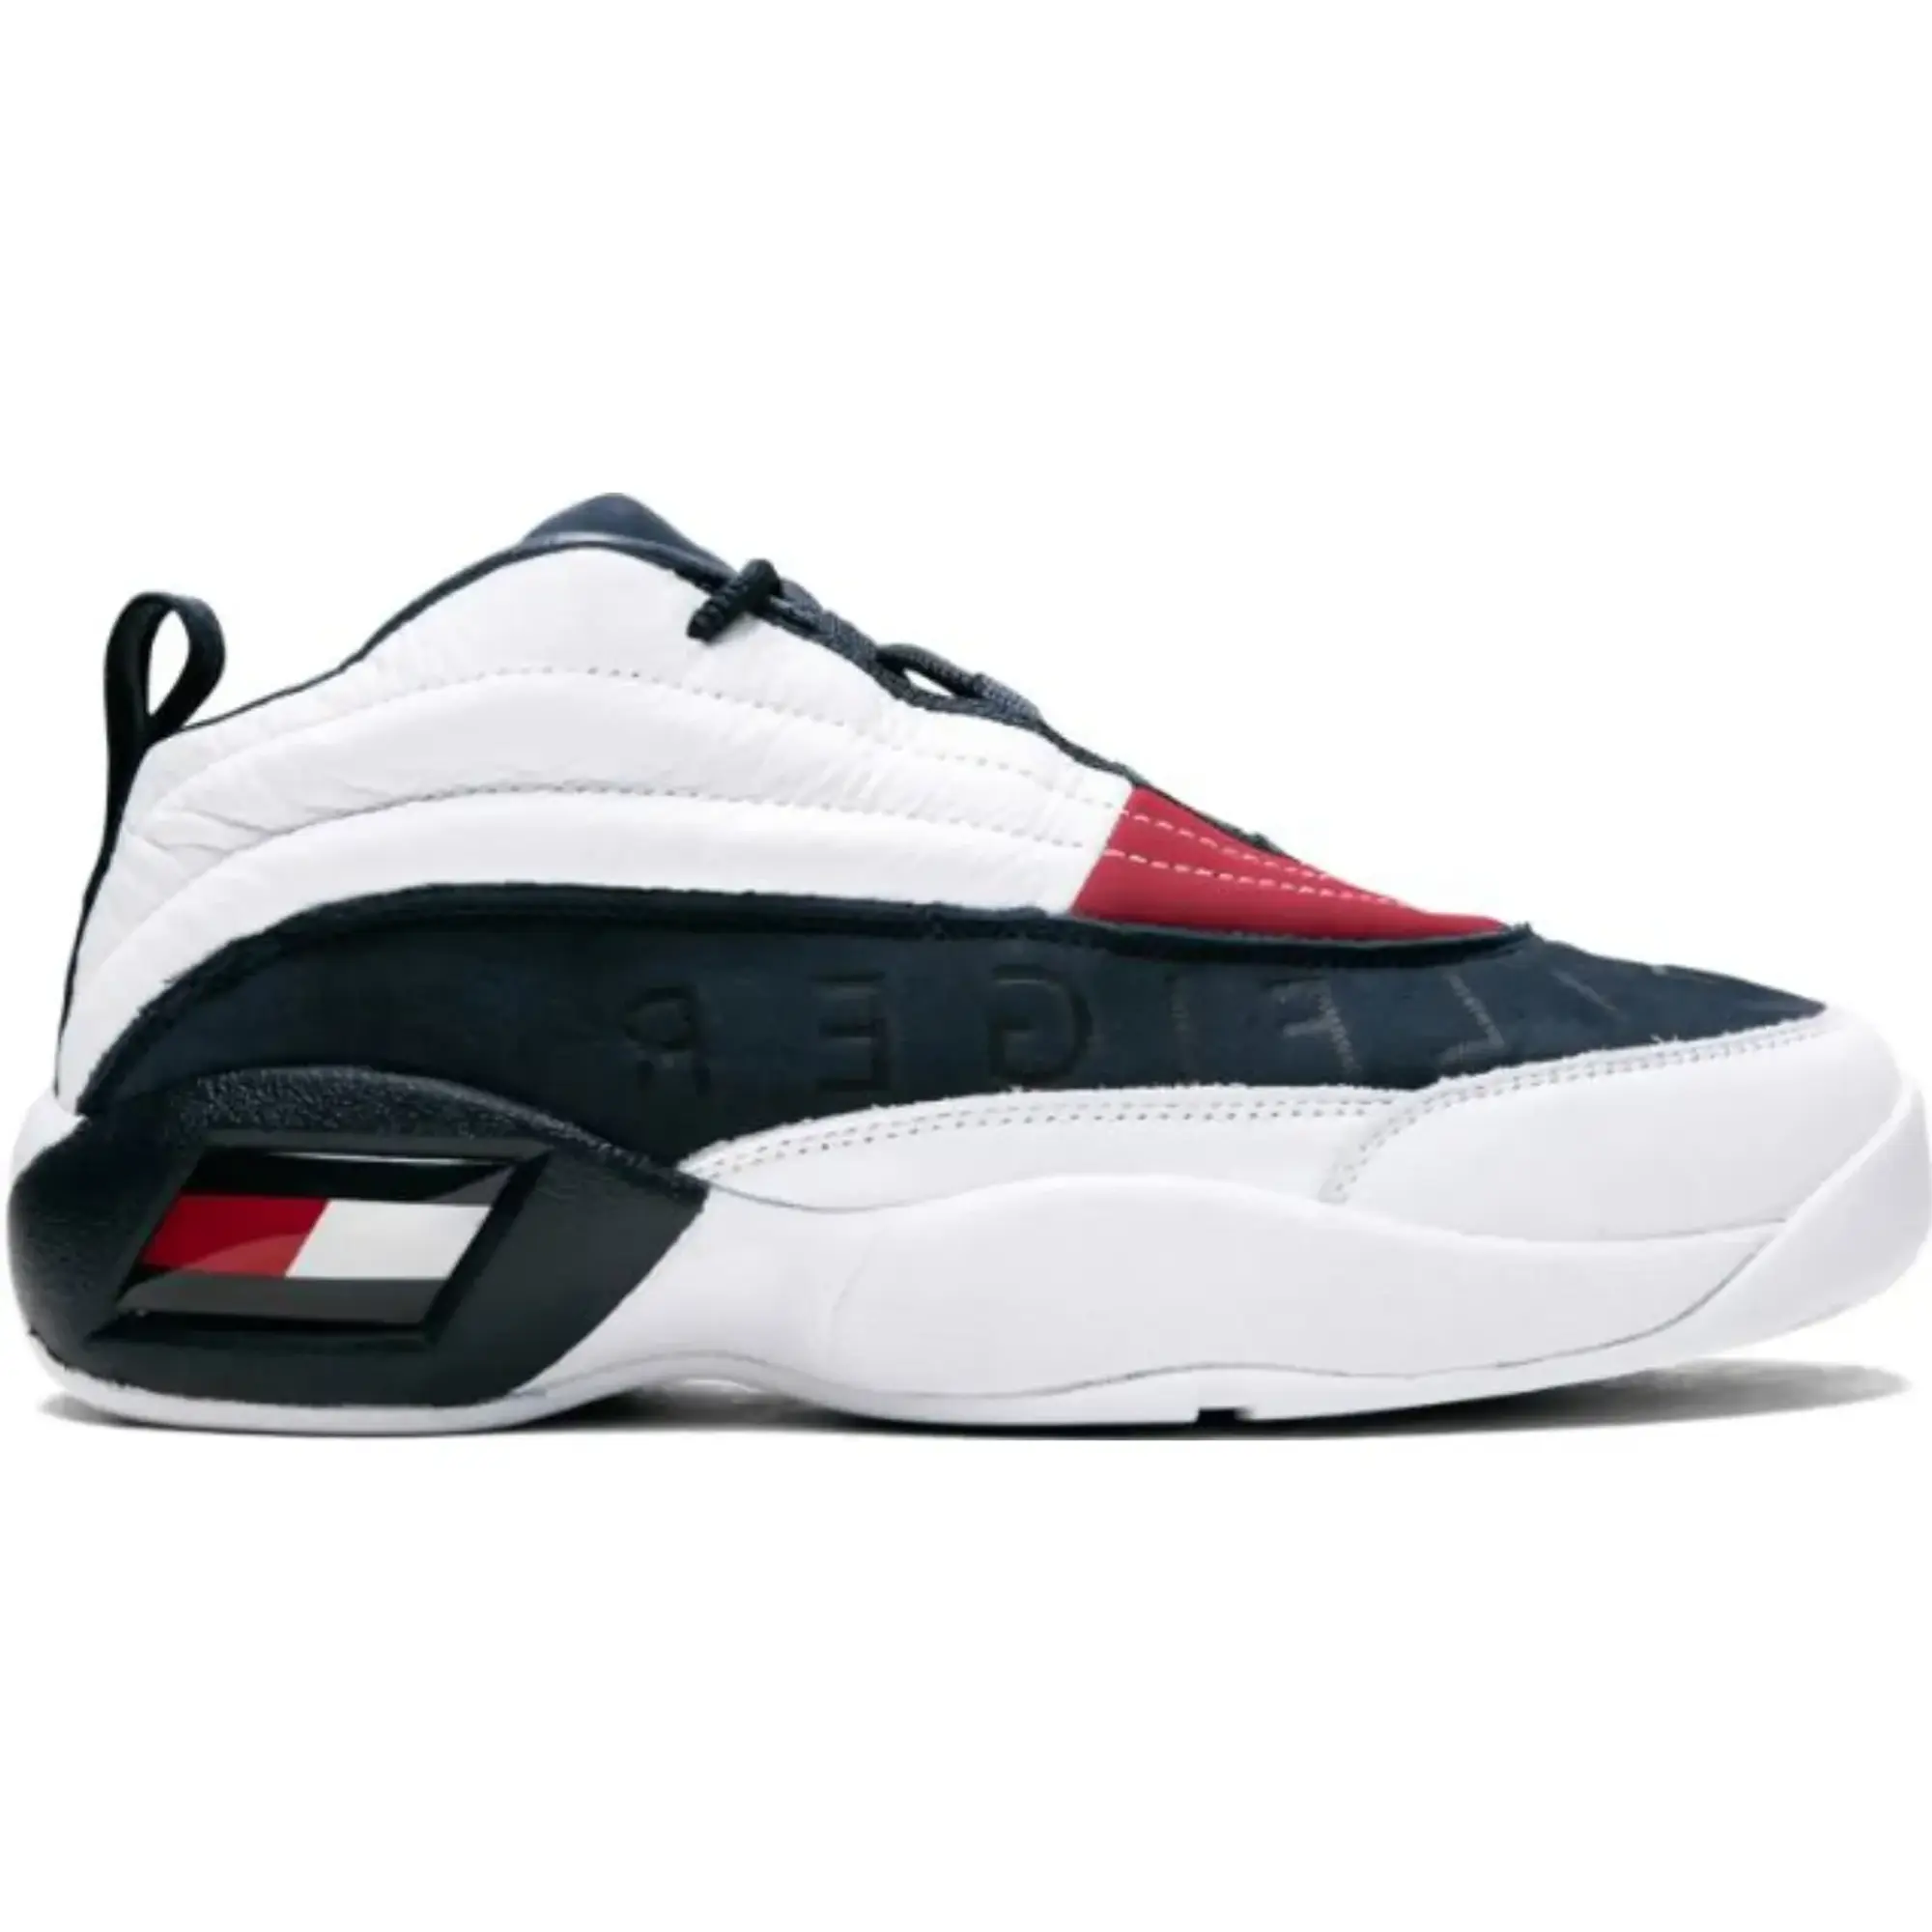 Fila TH BBall Sneaker OG KITH X TOMMY HILFIGER Shoes